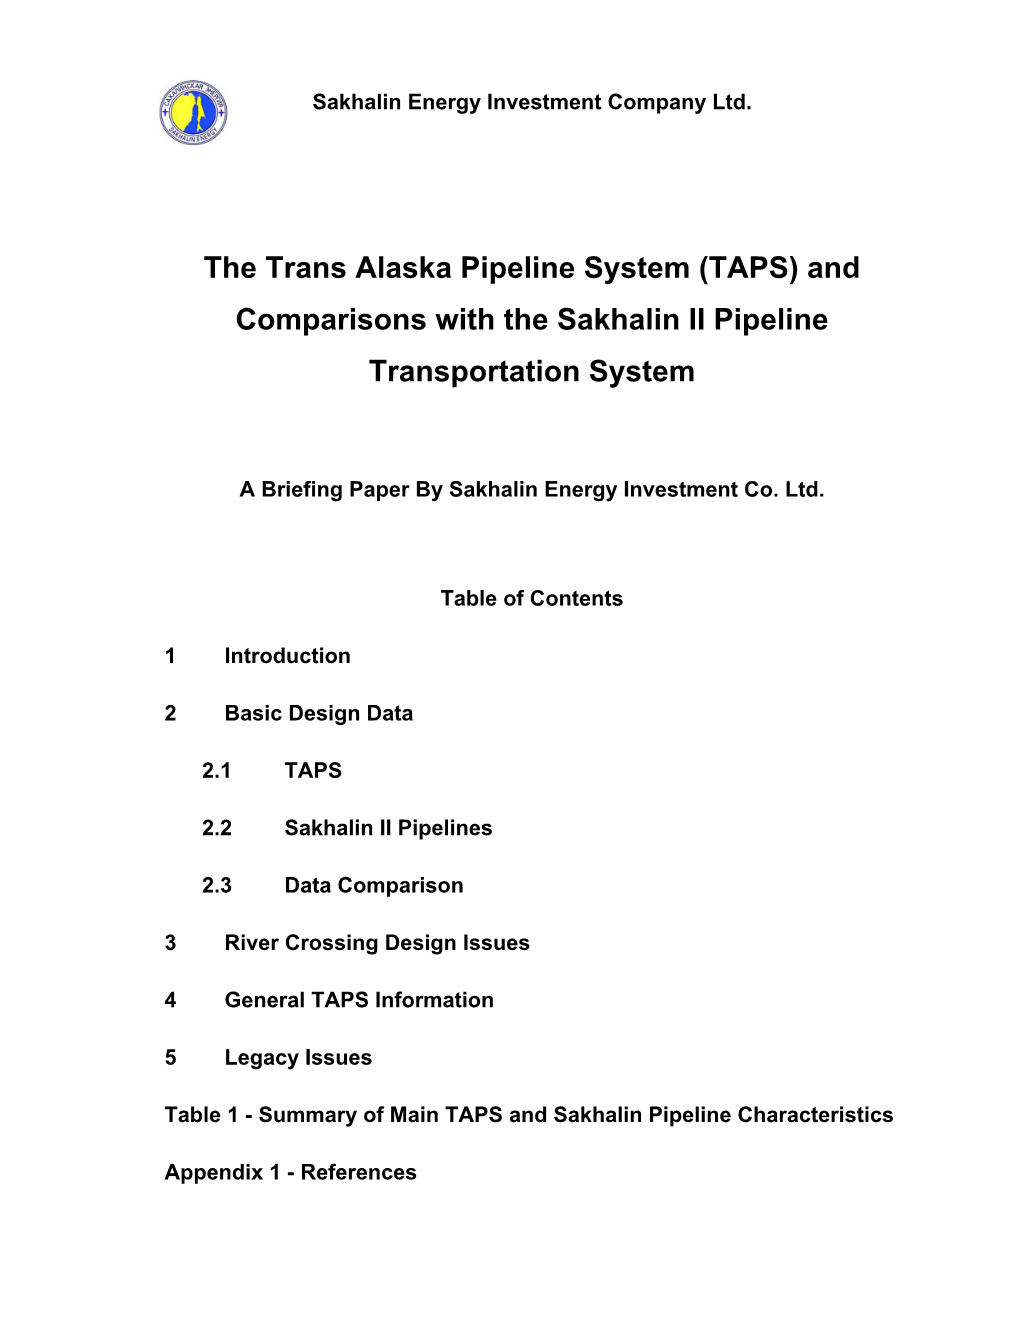 The Trans Alaska Pipeline System (TAPS) and Comparisons with the Sakhalin II Pipeline Transportation System